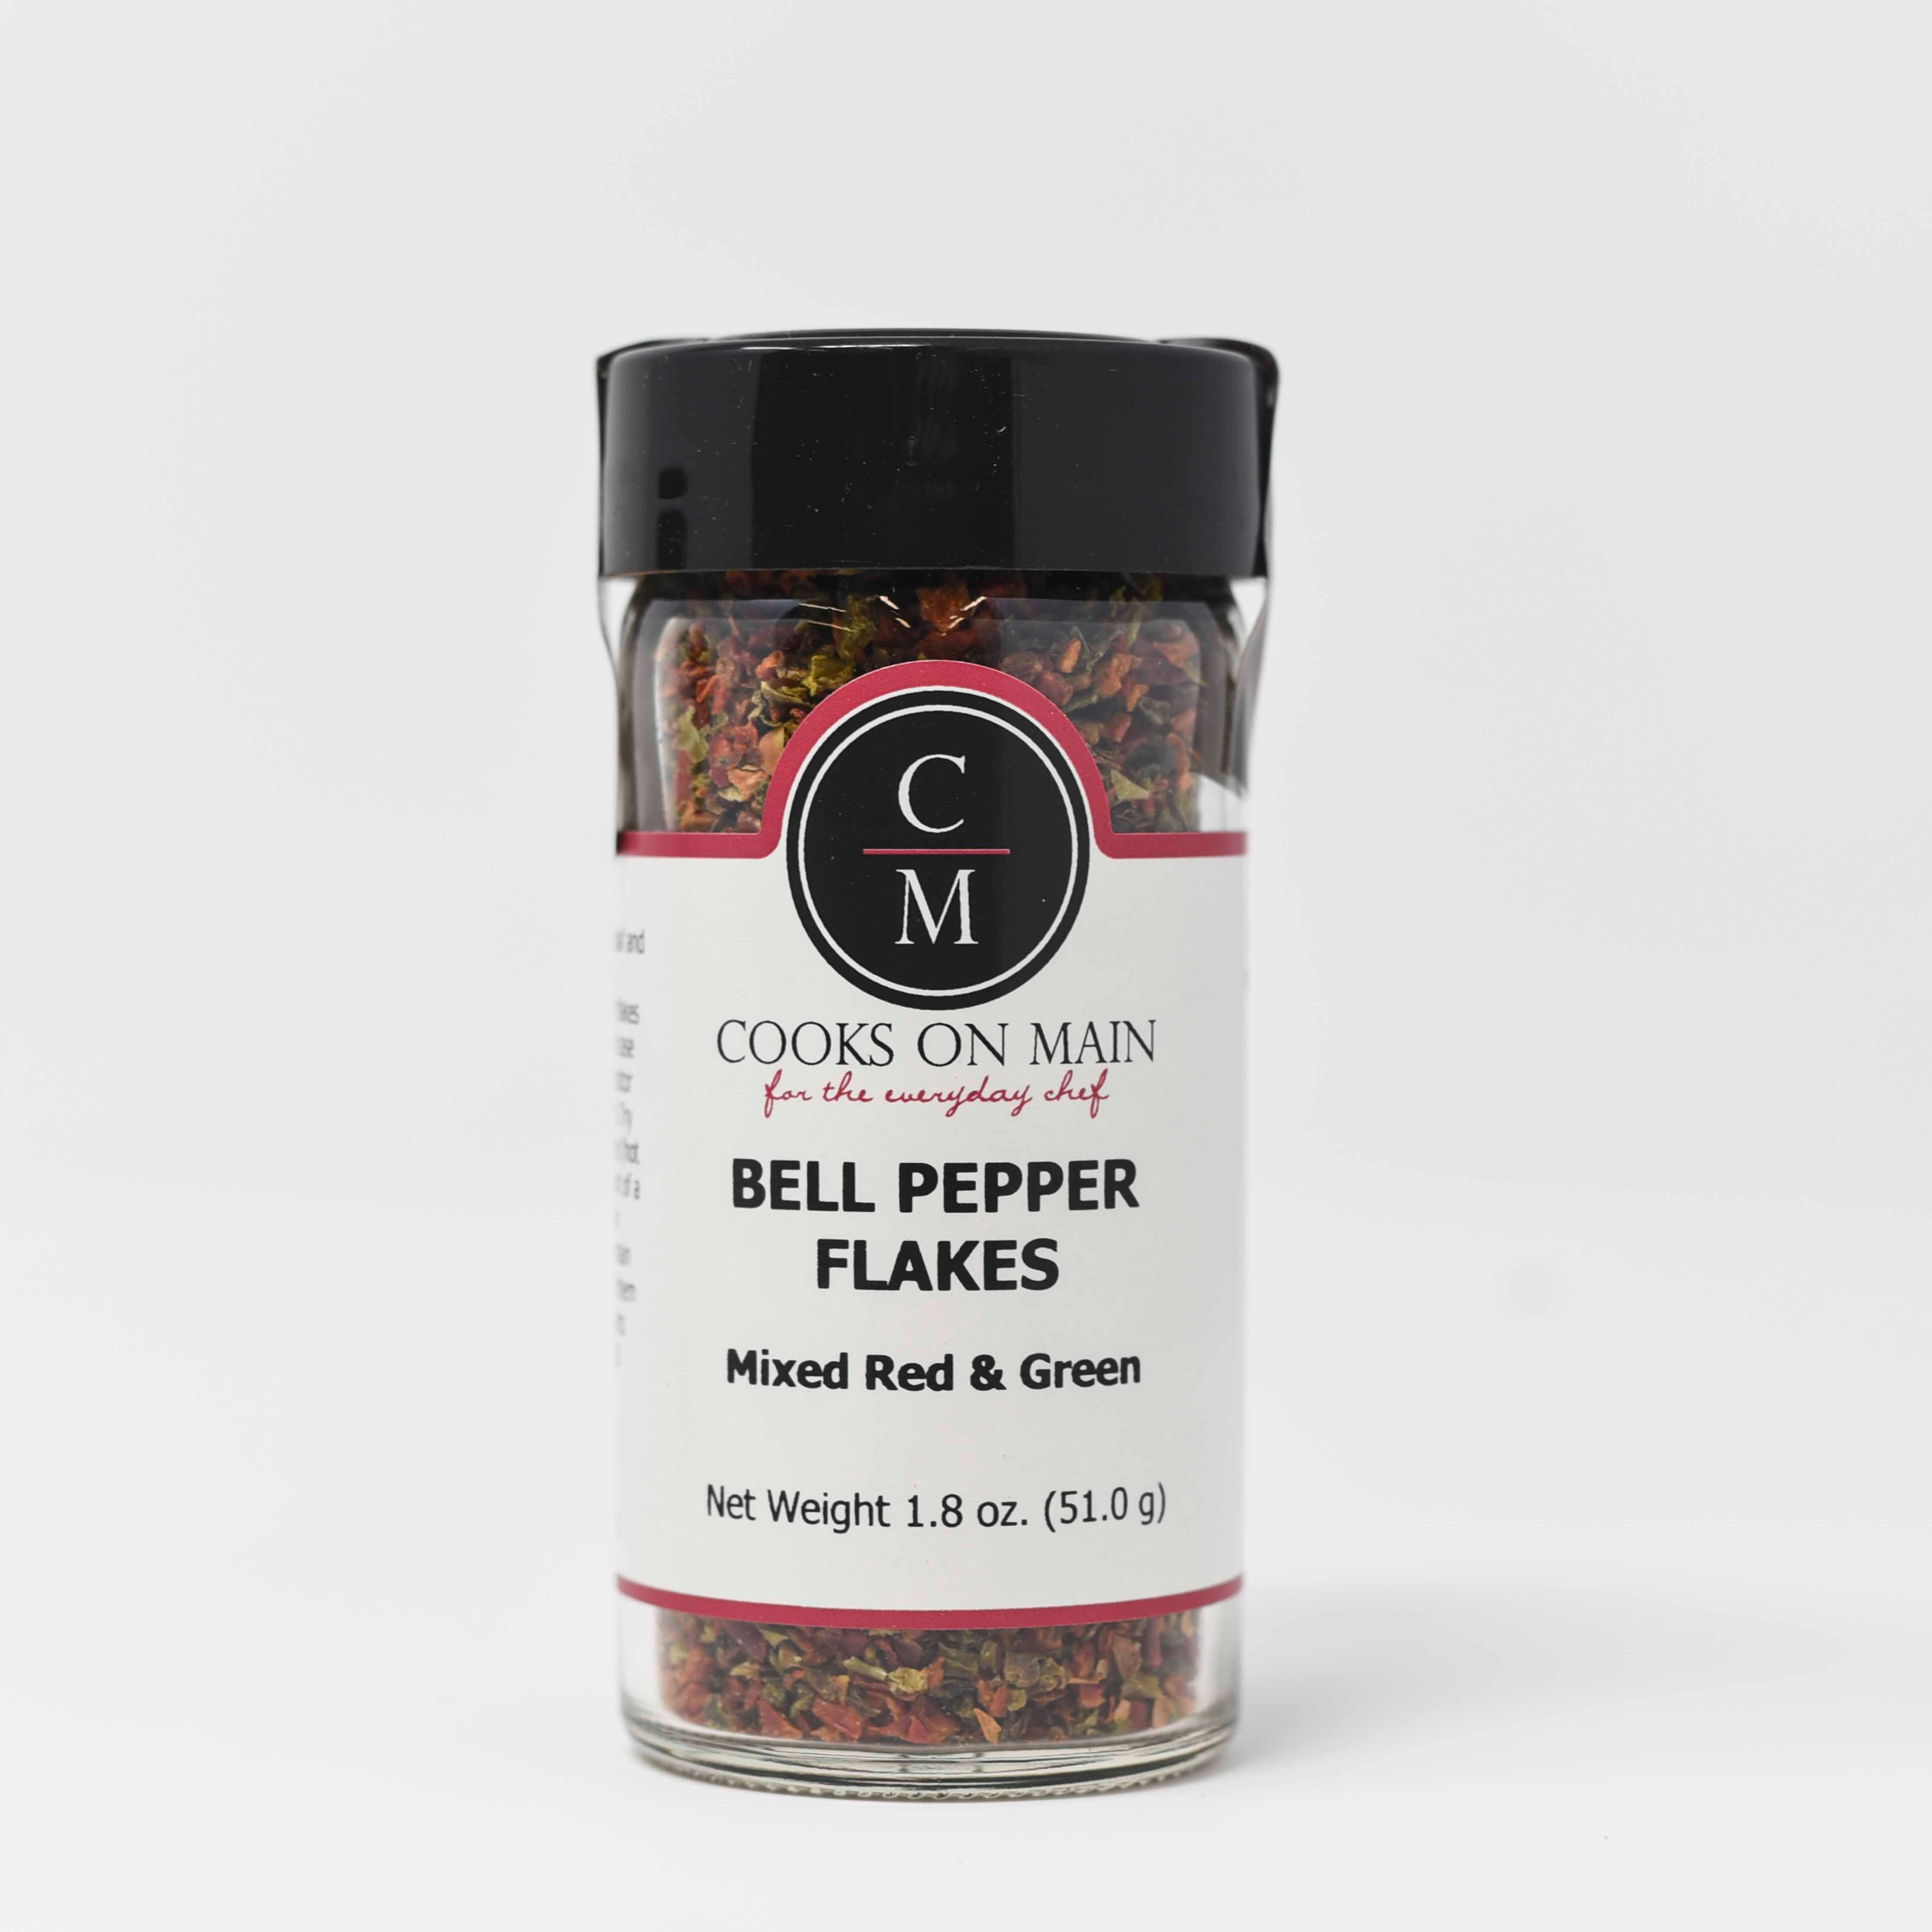 Bell Pepper Flakes